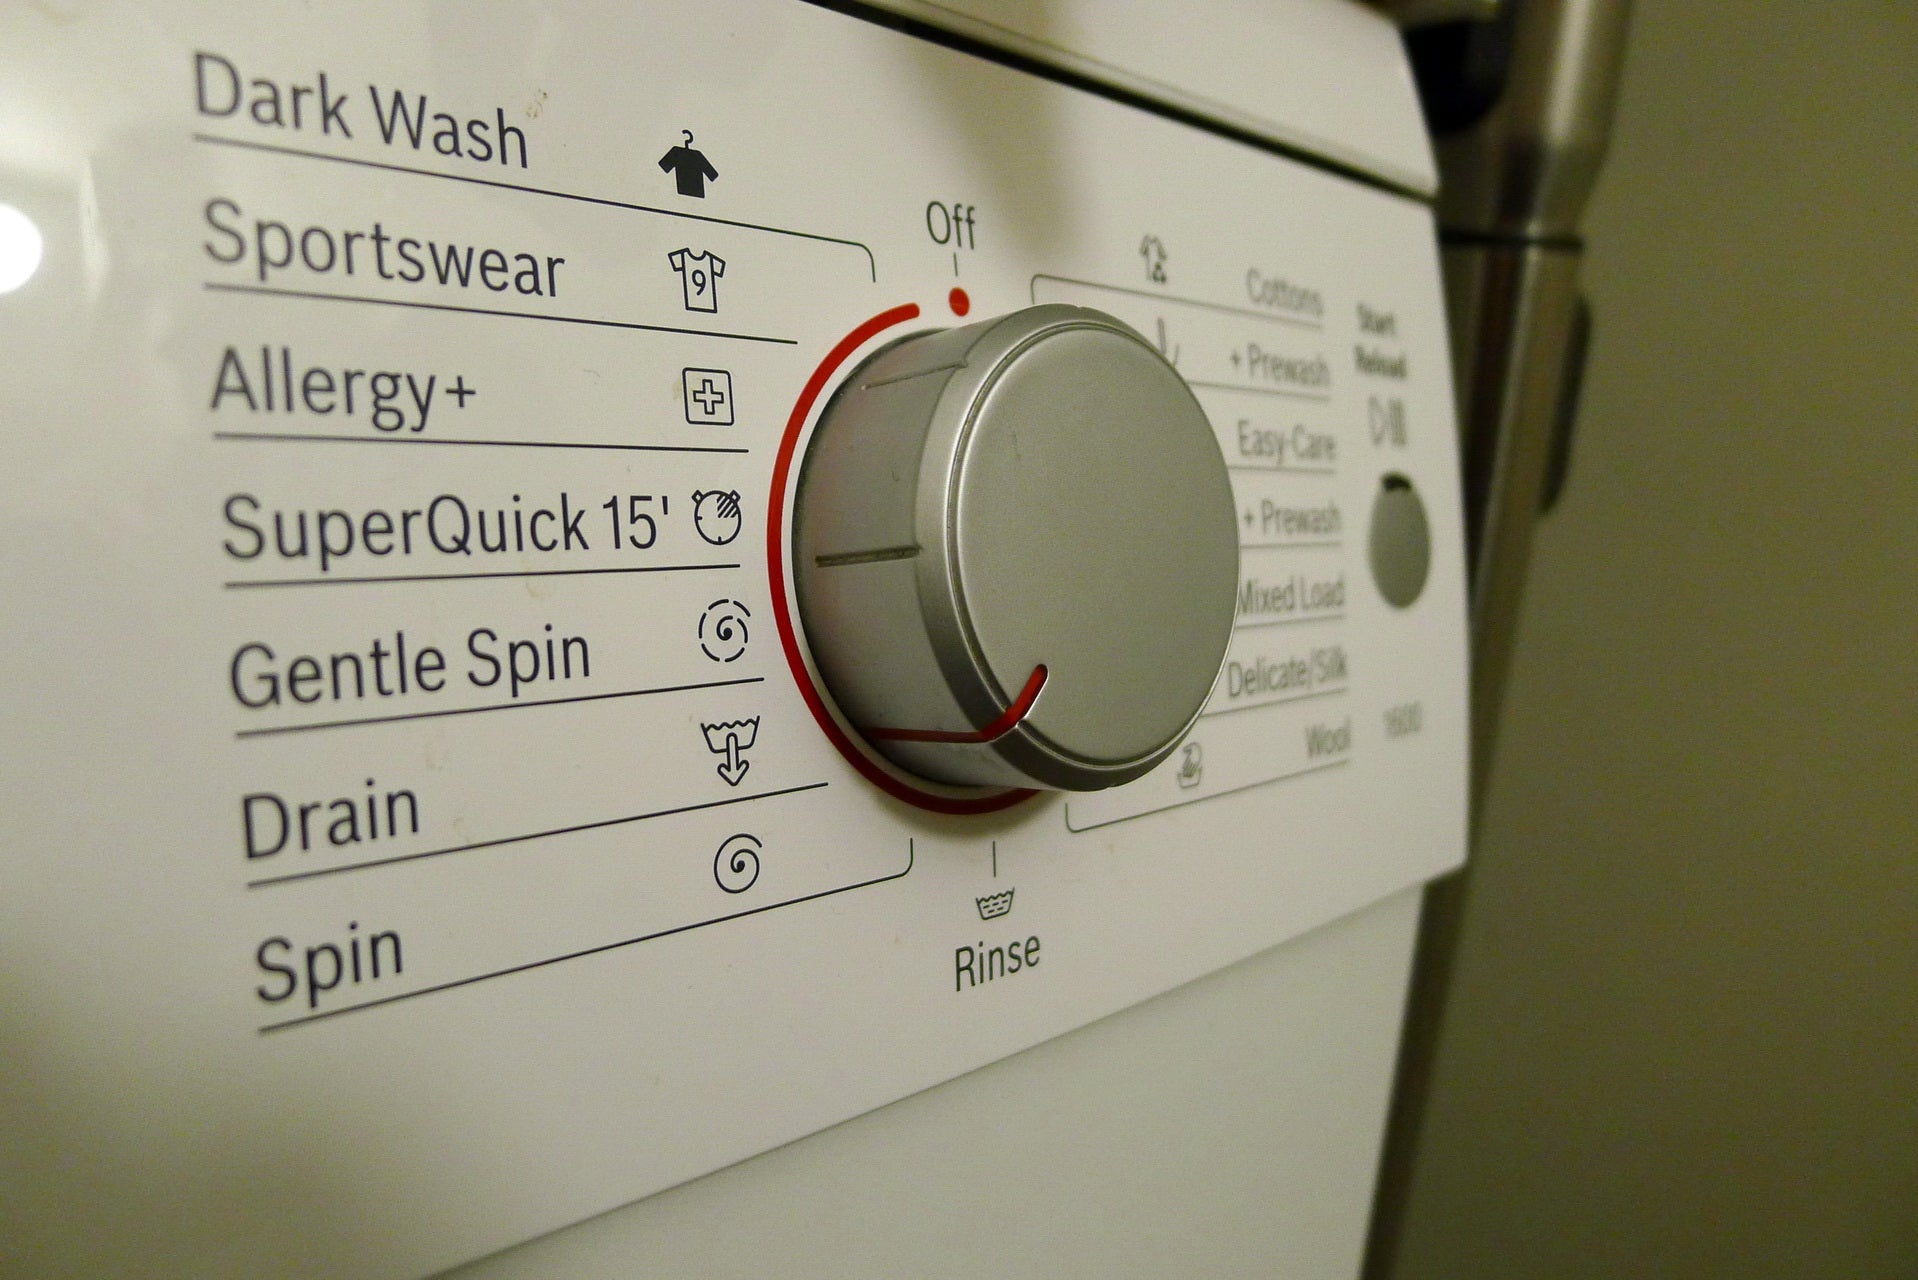 How To Manually Drain Washer Washing machine won't drain? Here's how to unblock it | Trusted Reviews